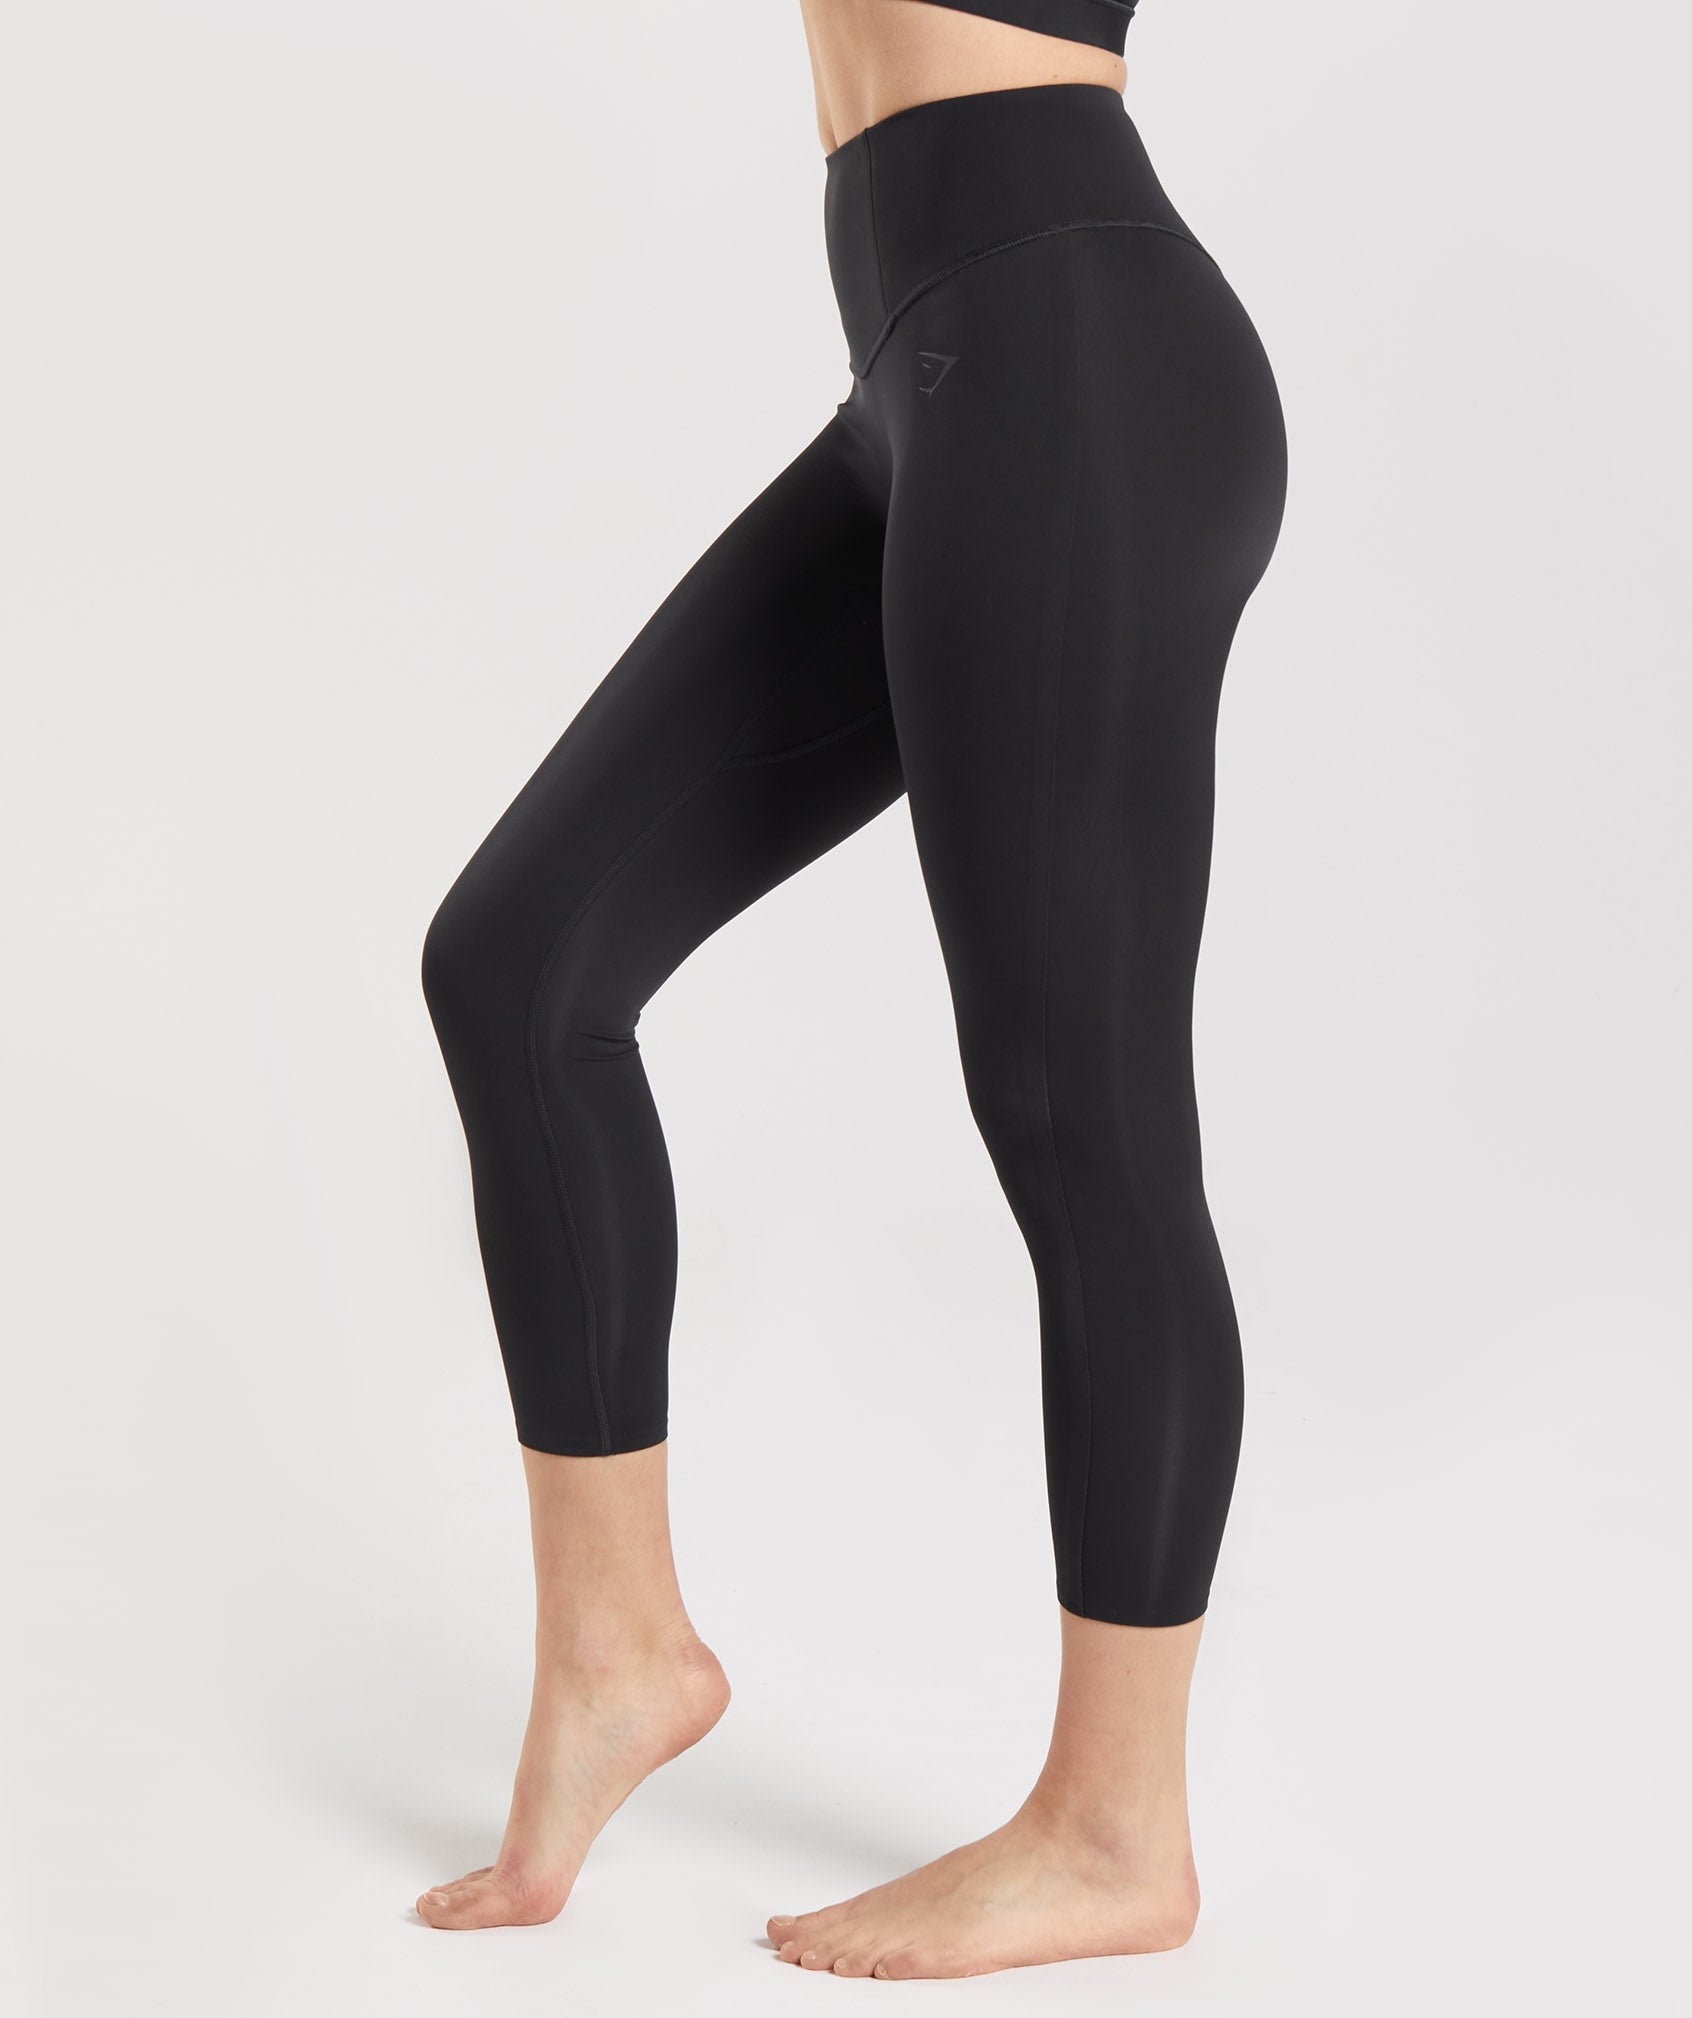 Yogalicious ‼️ Cropped Leggings‼️ Black Size M - $75 New With Tags - From  Layna